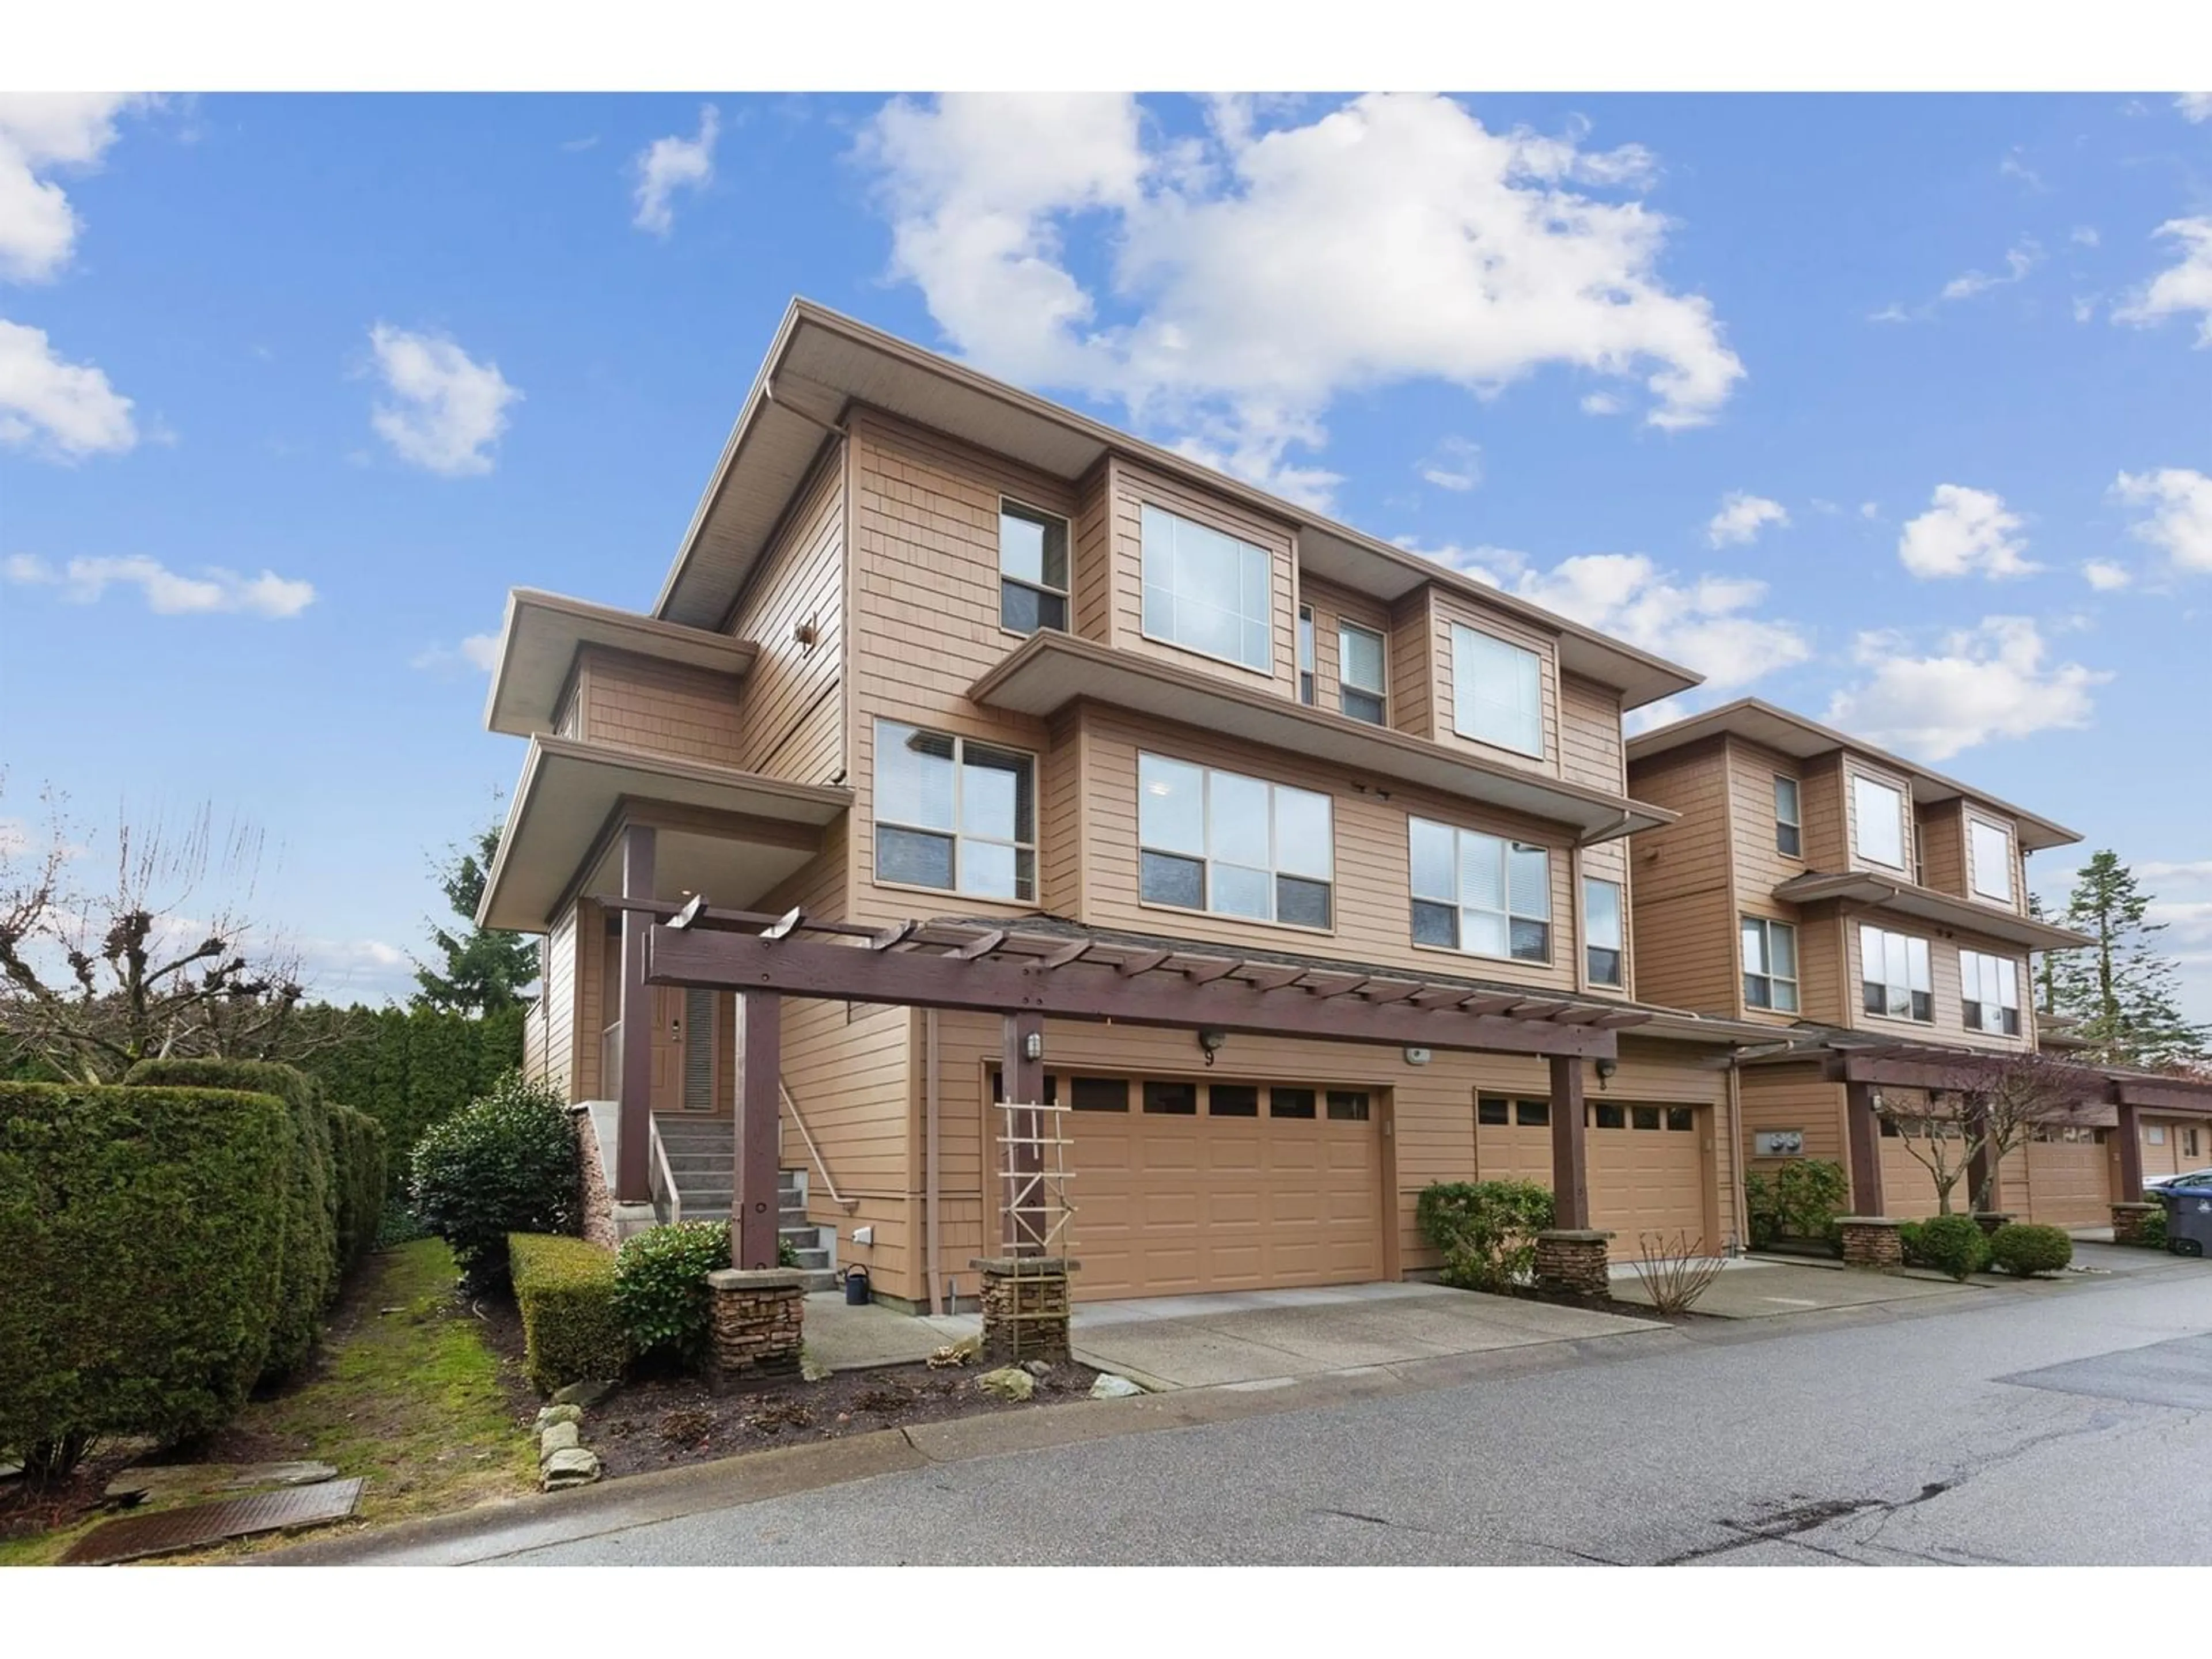 A pic from exterior of the house or condo for 9 16655 64 AVENUE, Surrey British Columbia V3S3V1